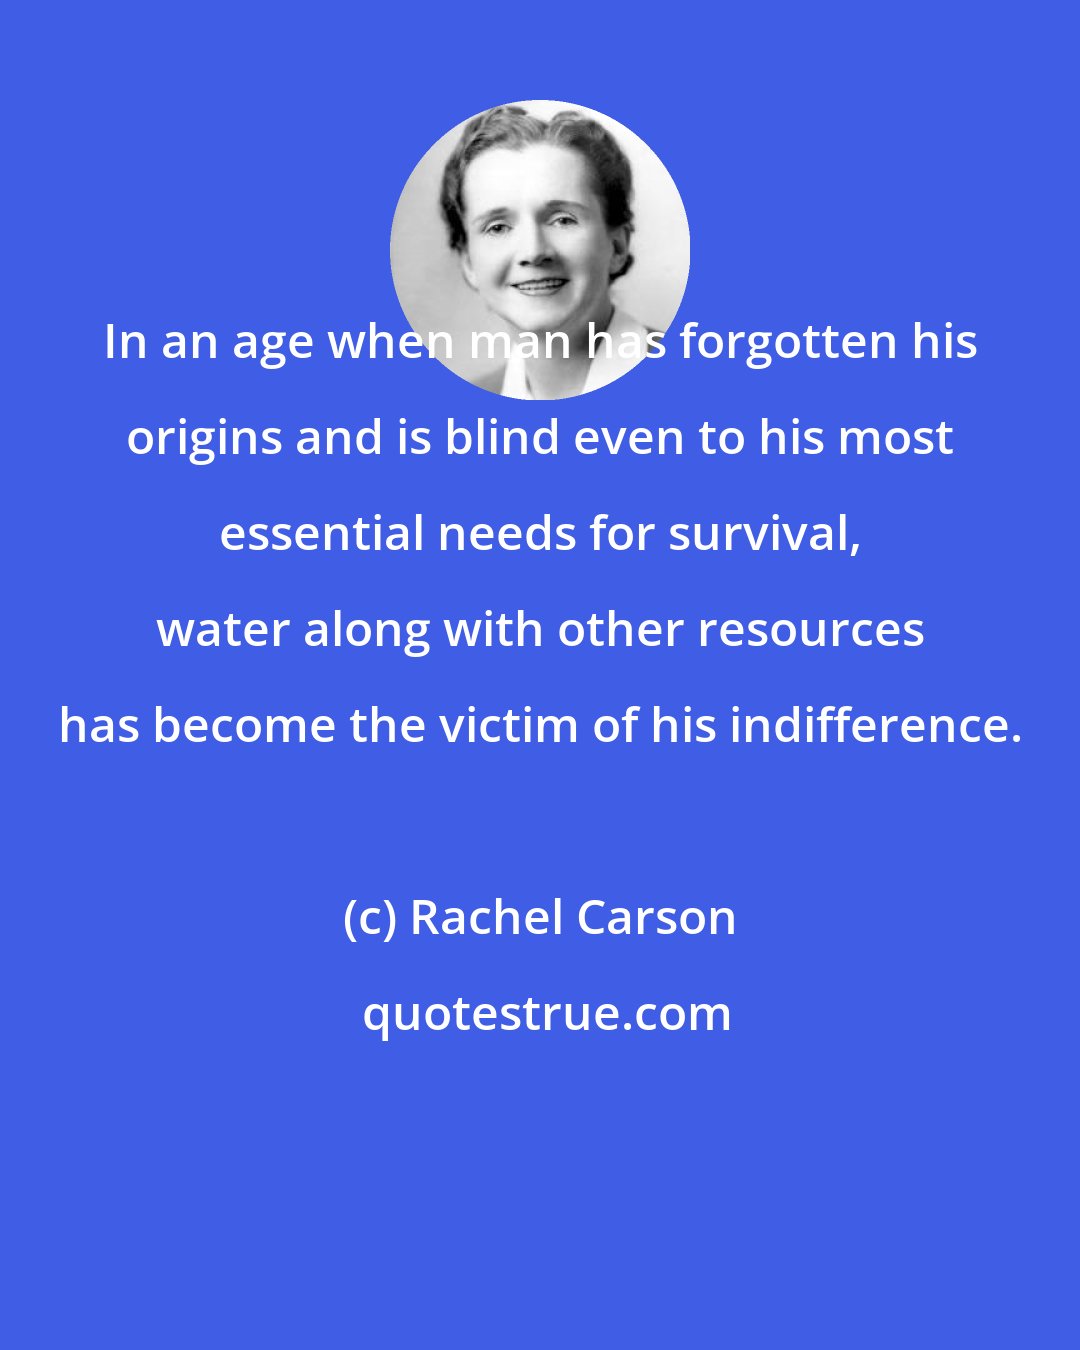 Rachel Carson: In an age when man has forgotten his origins and is blind even to his most essential needs for survival, water along with other resources has become the victim of his indifference.